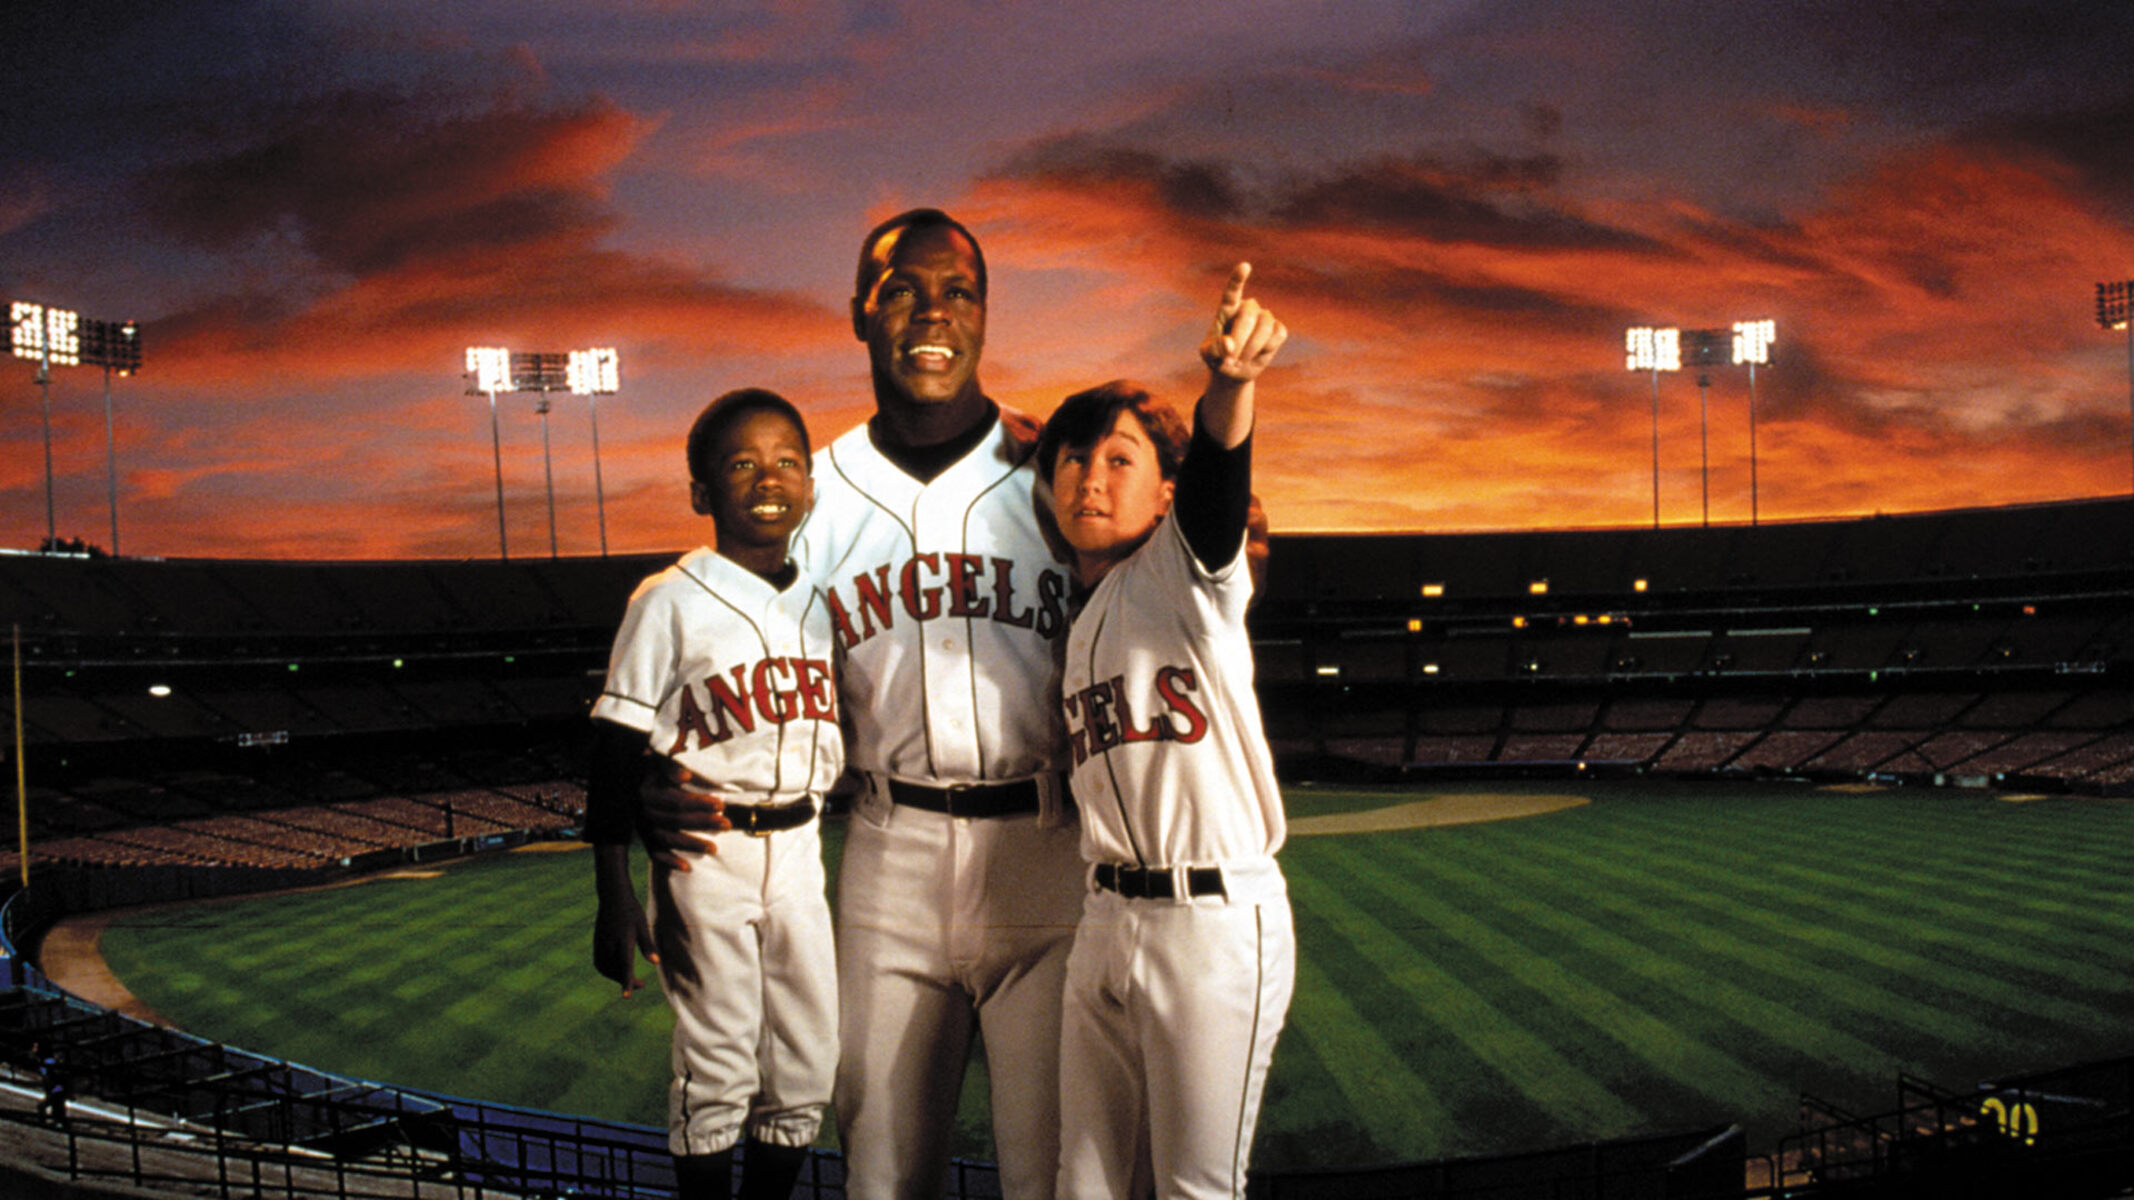 How To Watch Angels In The Outfield Robots